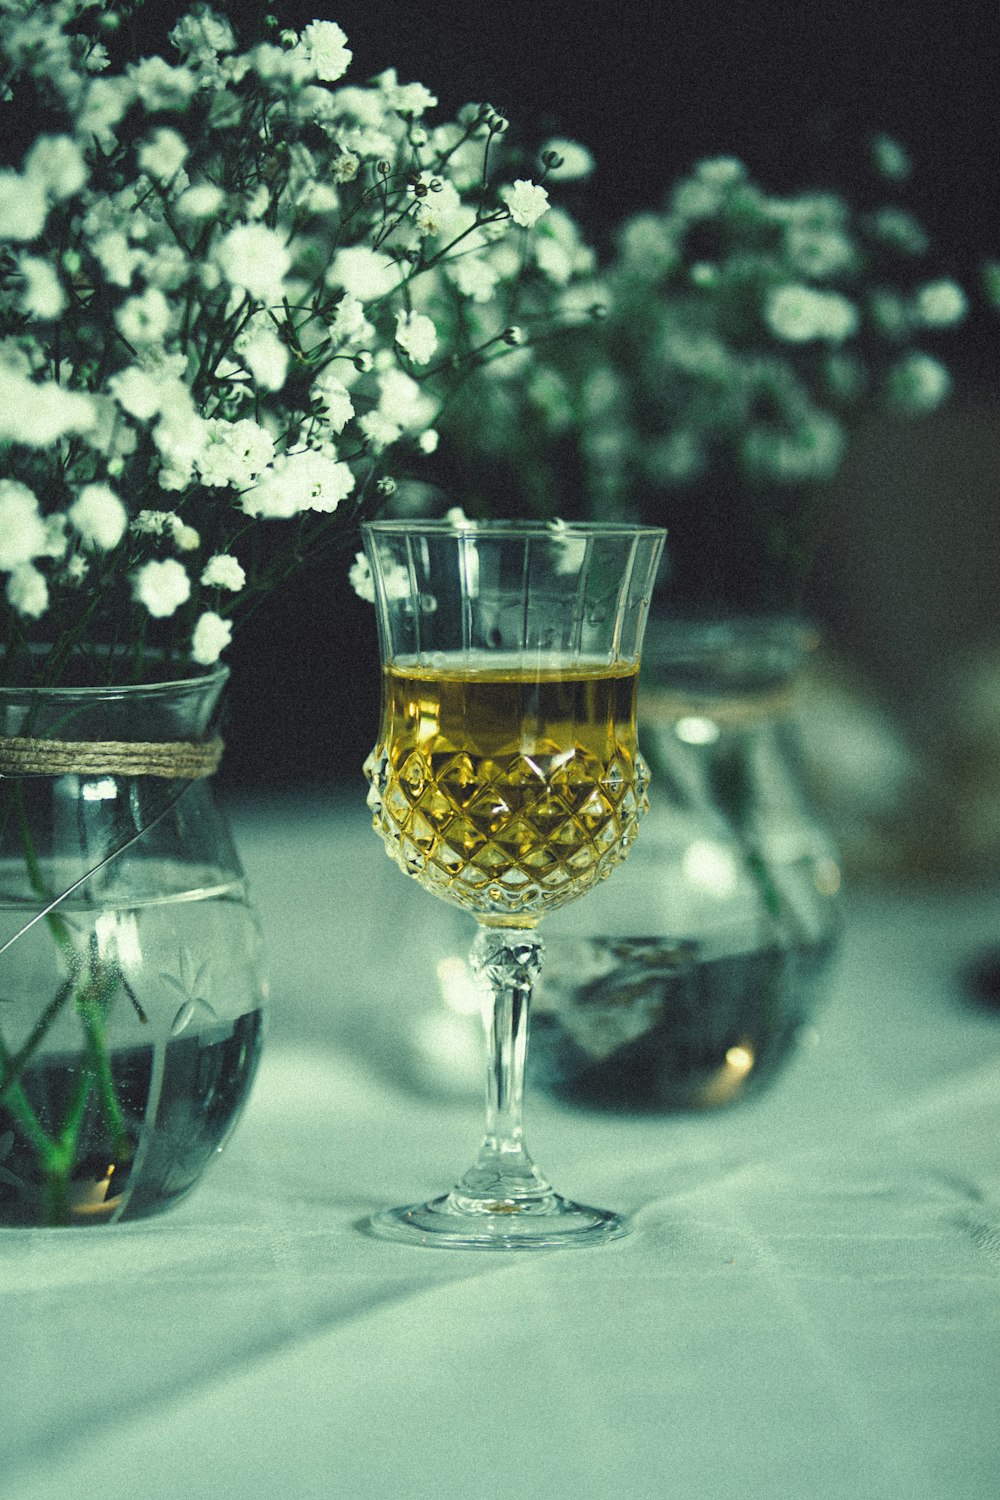 a glass of wine sitting on a table next to a vase of flowers